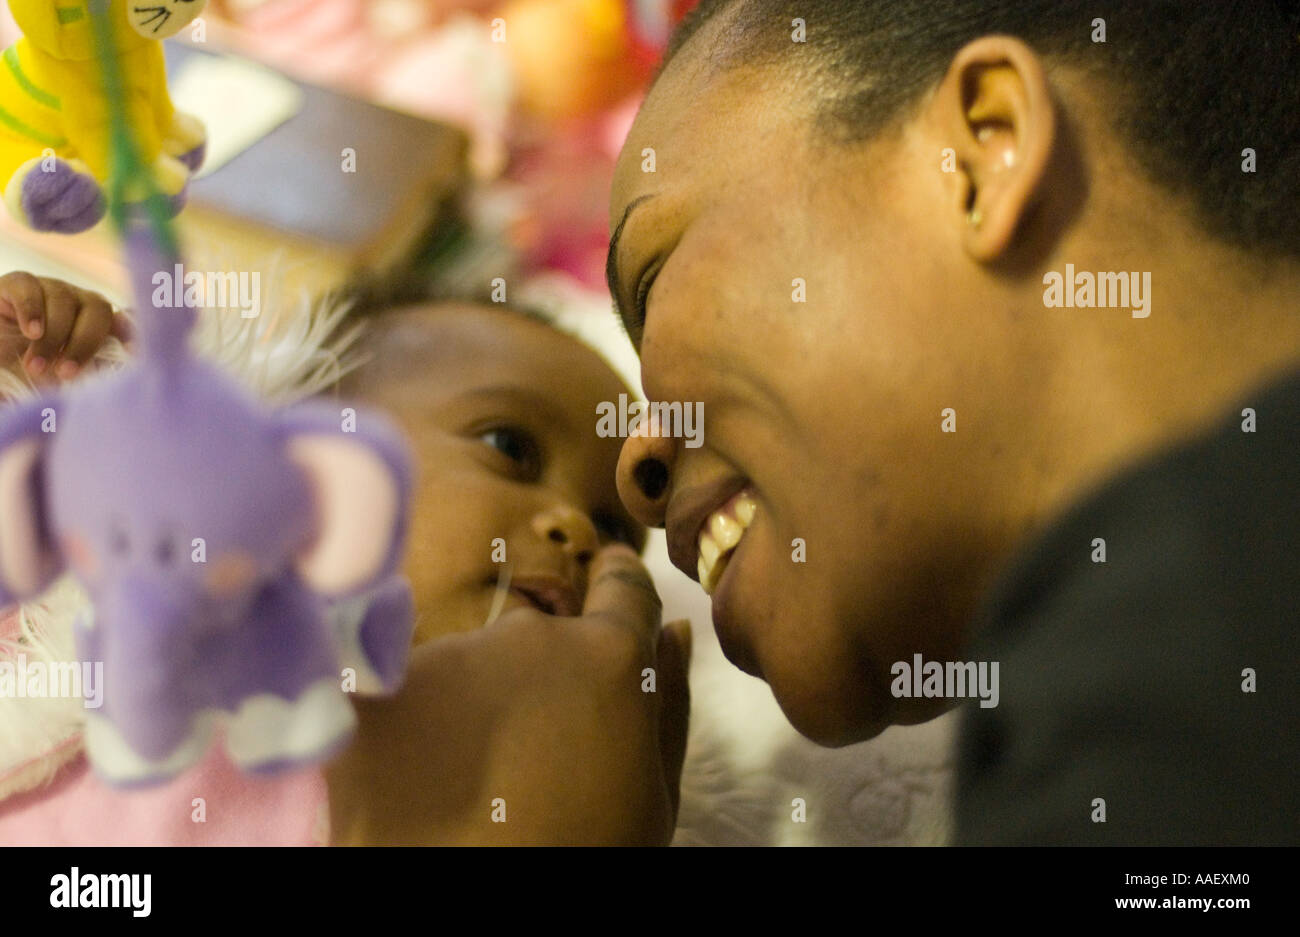 Prison inmate, mother and baby, inside Europe's largest women's prison, Holloway in London Stock Photo